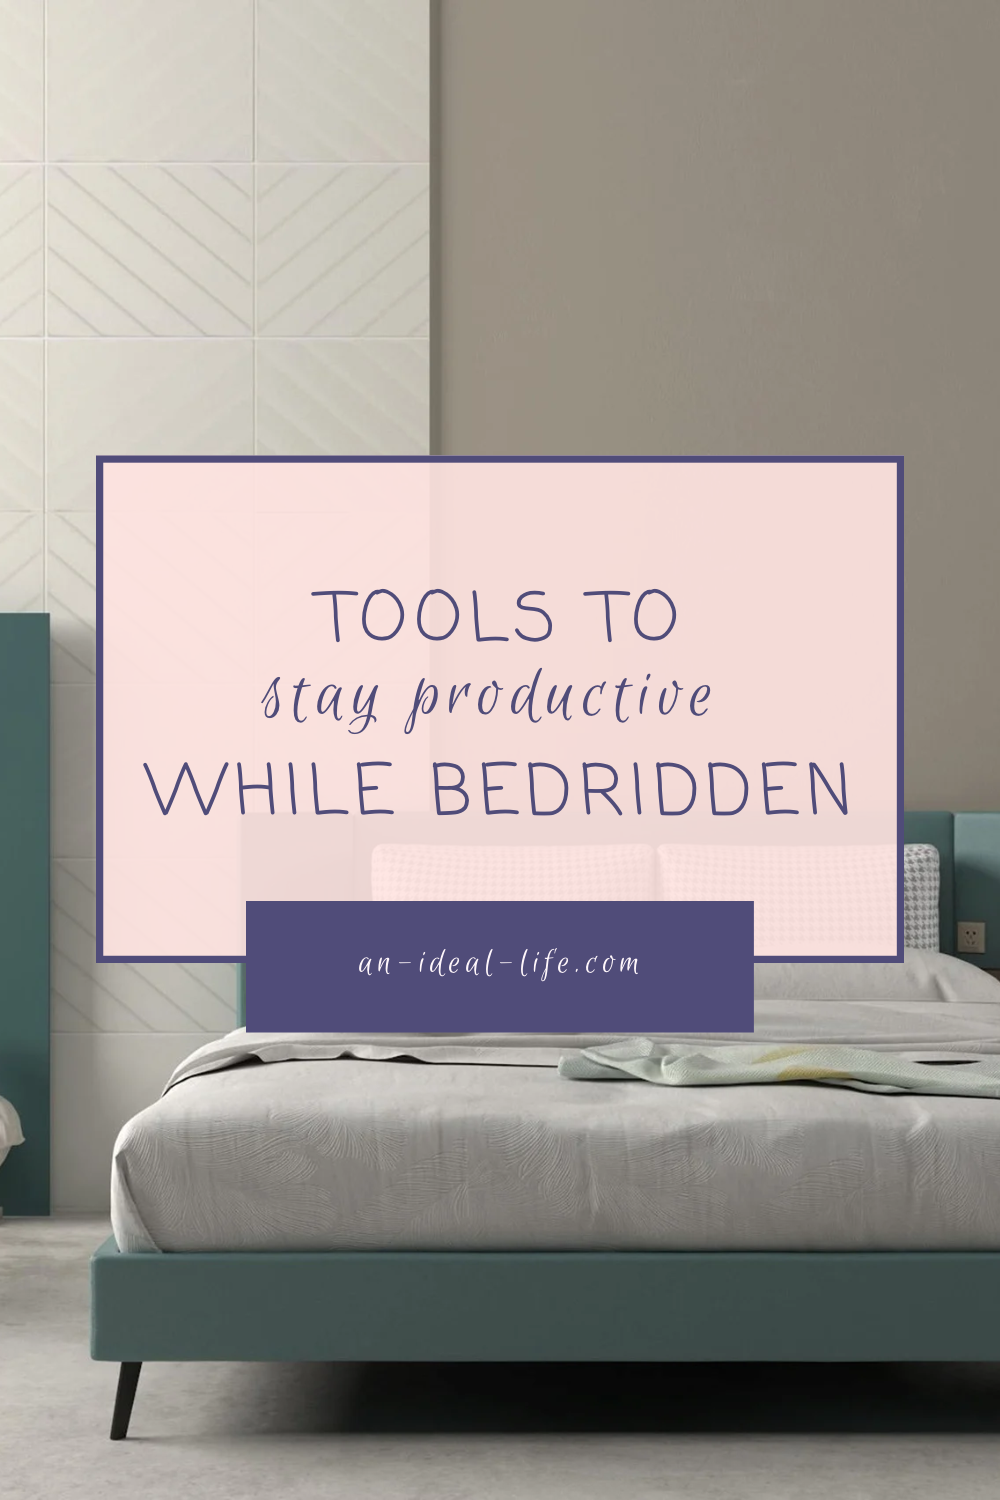 Tools to Stay Productive While Bedridden